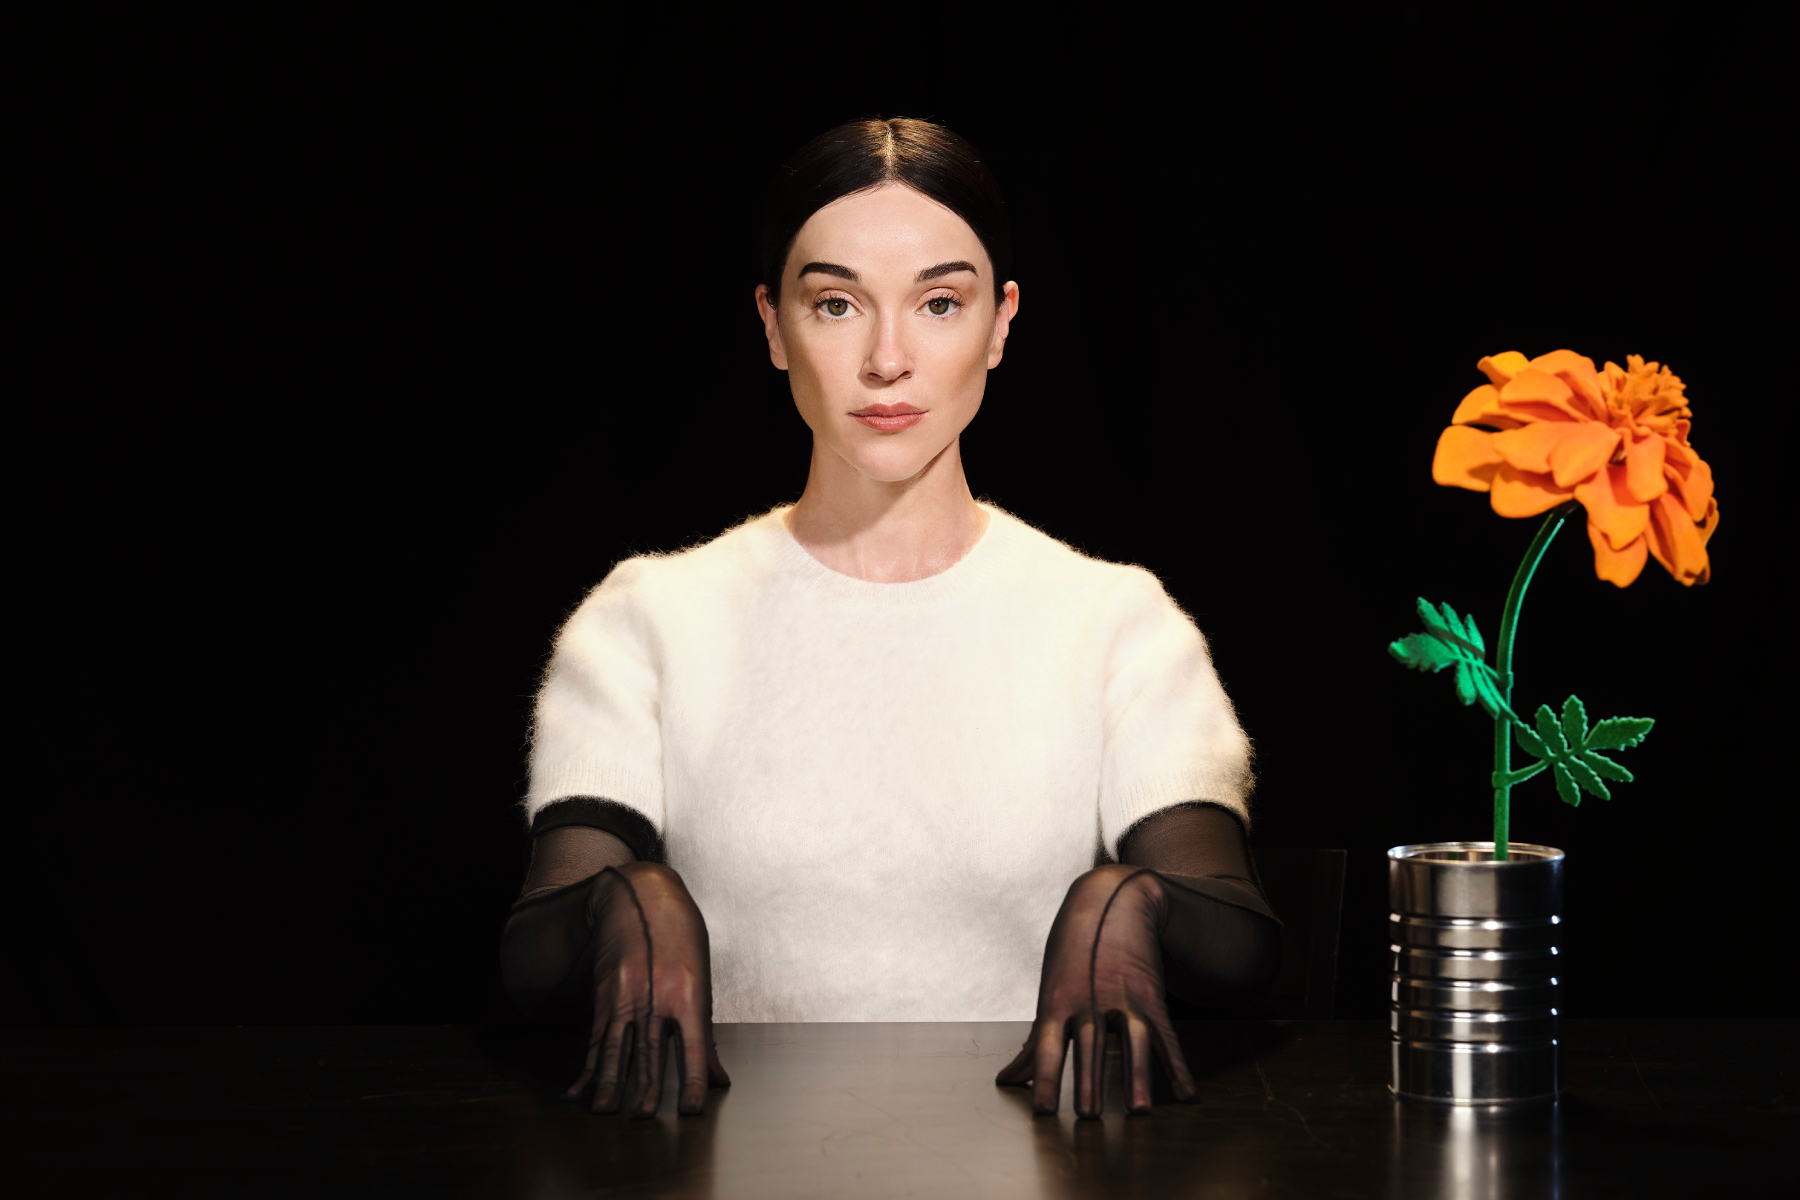 St. Vincent Looks Inside to Reveal ‘Big Time Nothing’ on New Song